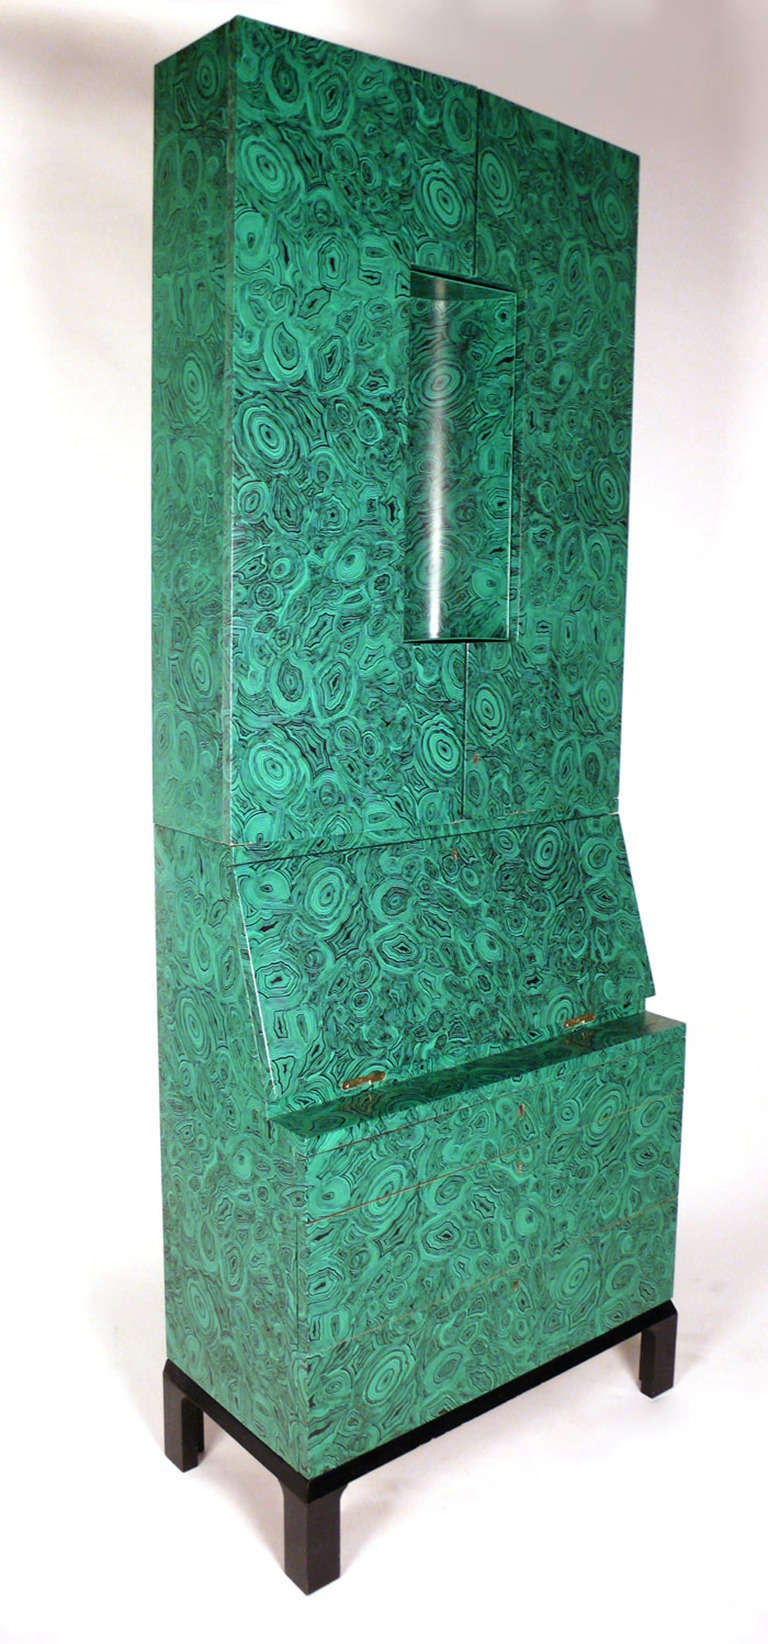 Rare and important illuminated Malachite Trumeau by Piero Fornasetti - 1956. Lithographic transfer -printed wood, metal, brass and glass. Retains original 'Fornasetti Milano' label. The Fornasetti Archive has confirmed that only three of the